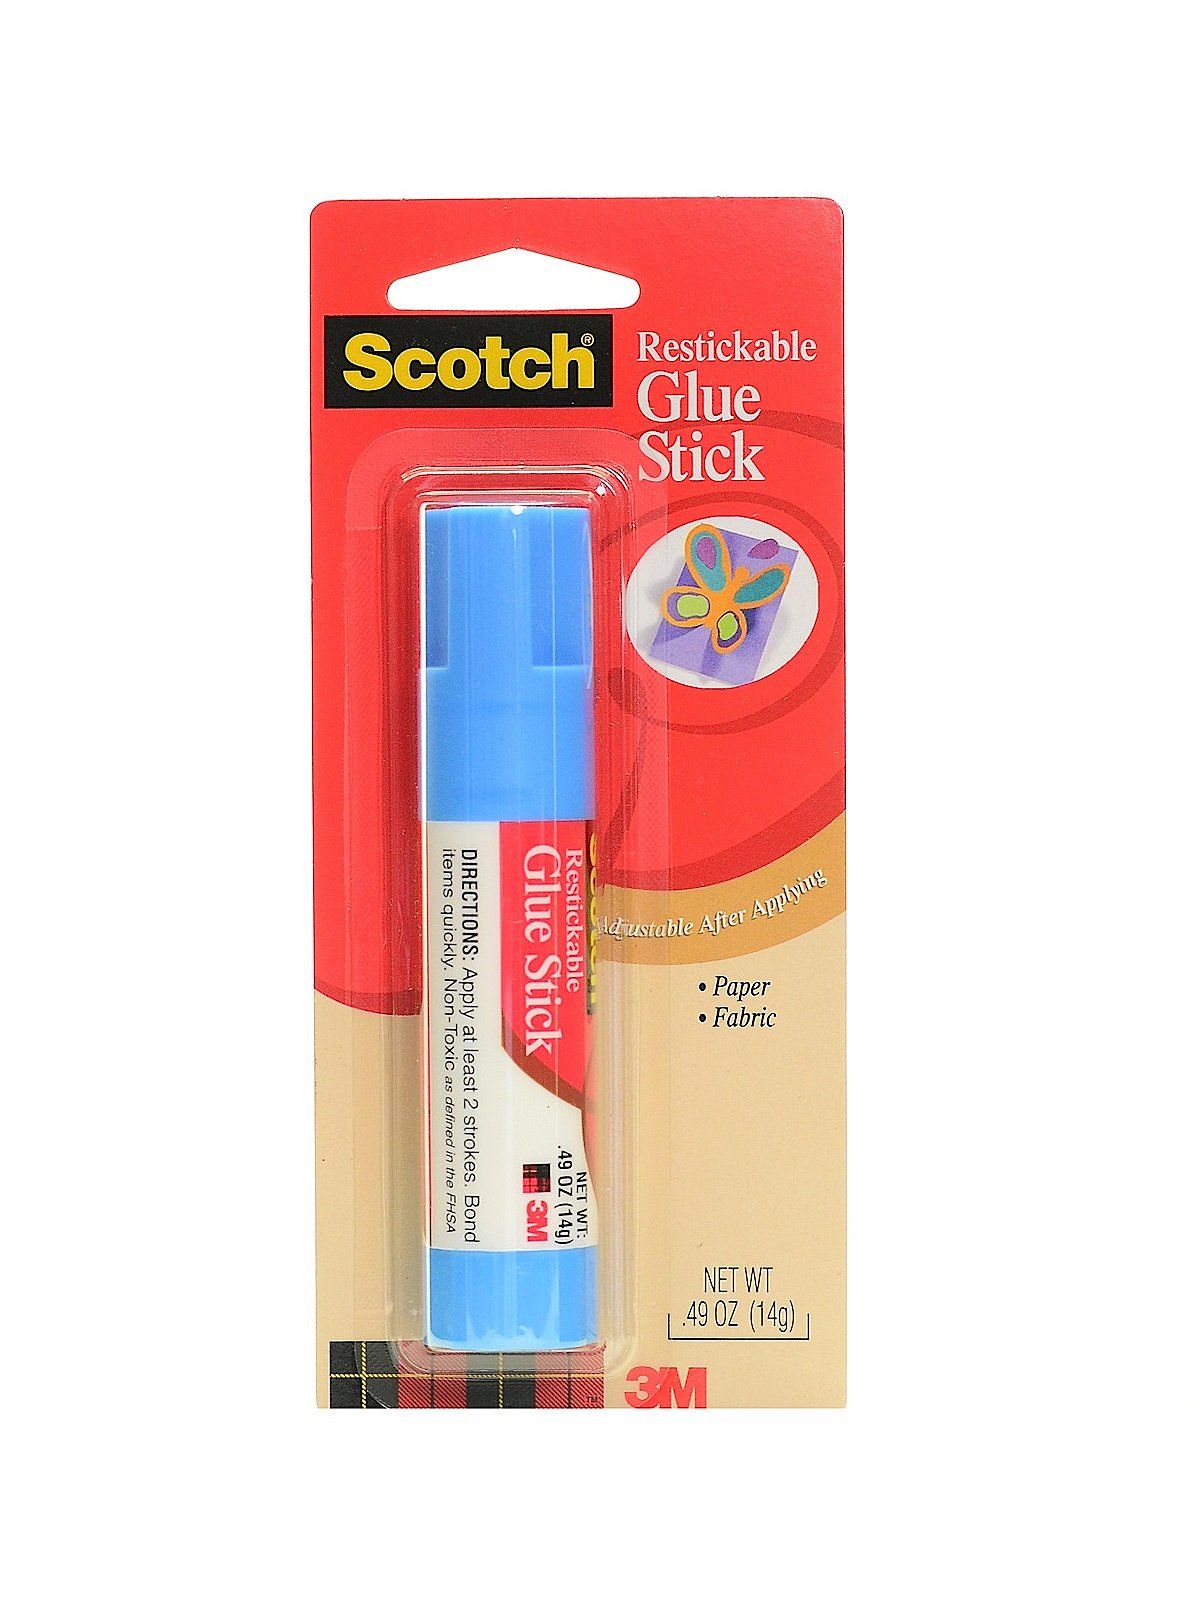  Removable Restickable Glue Stick, .49oz, Repositionable Stick,  2-PACK (Package include OfficeSupplyExpress Retractable Pen) : Arts, Crafts  & Sewing